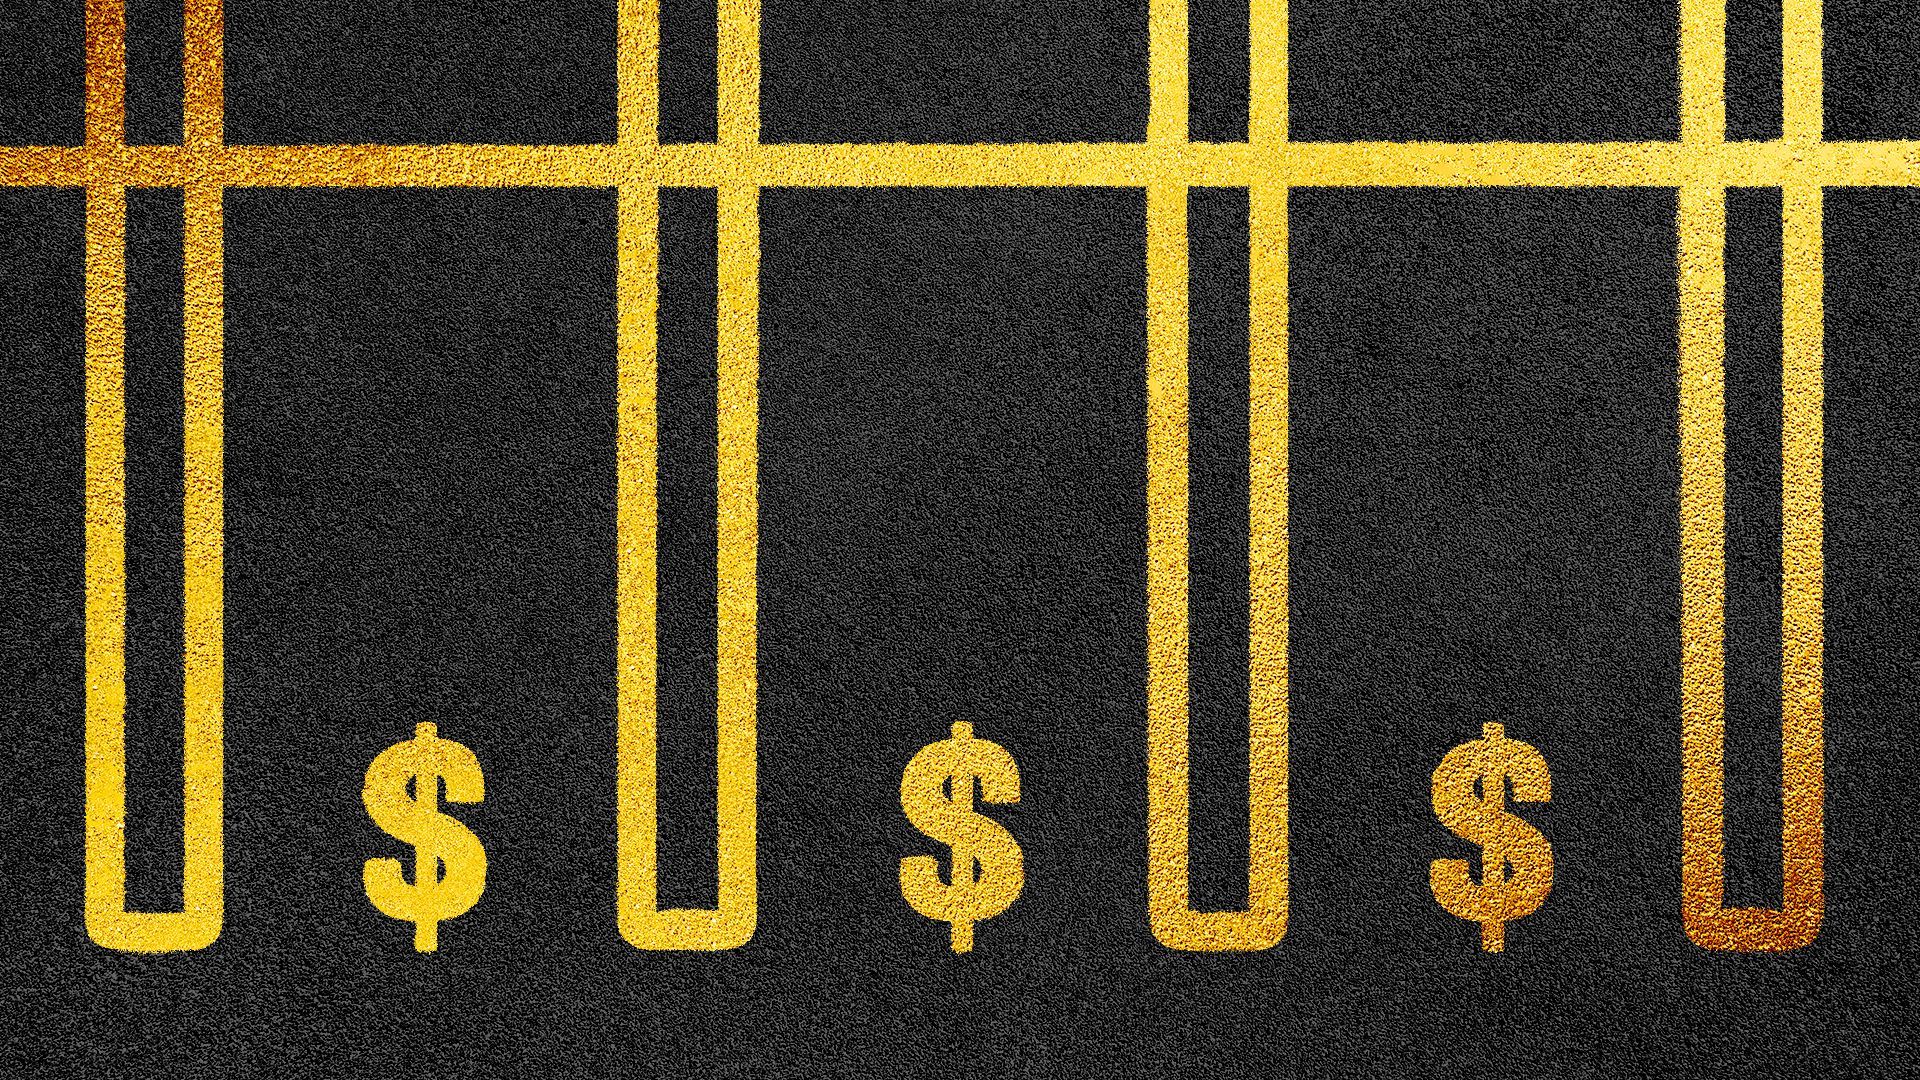 Illustration of a parking lot with lines painted with gold, and dollar signs in each one.